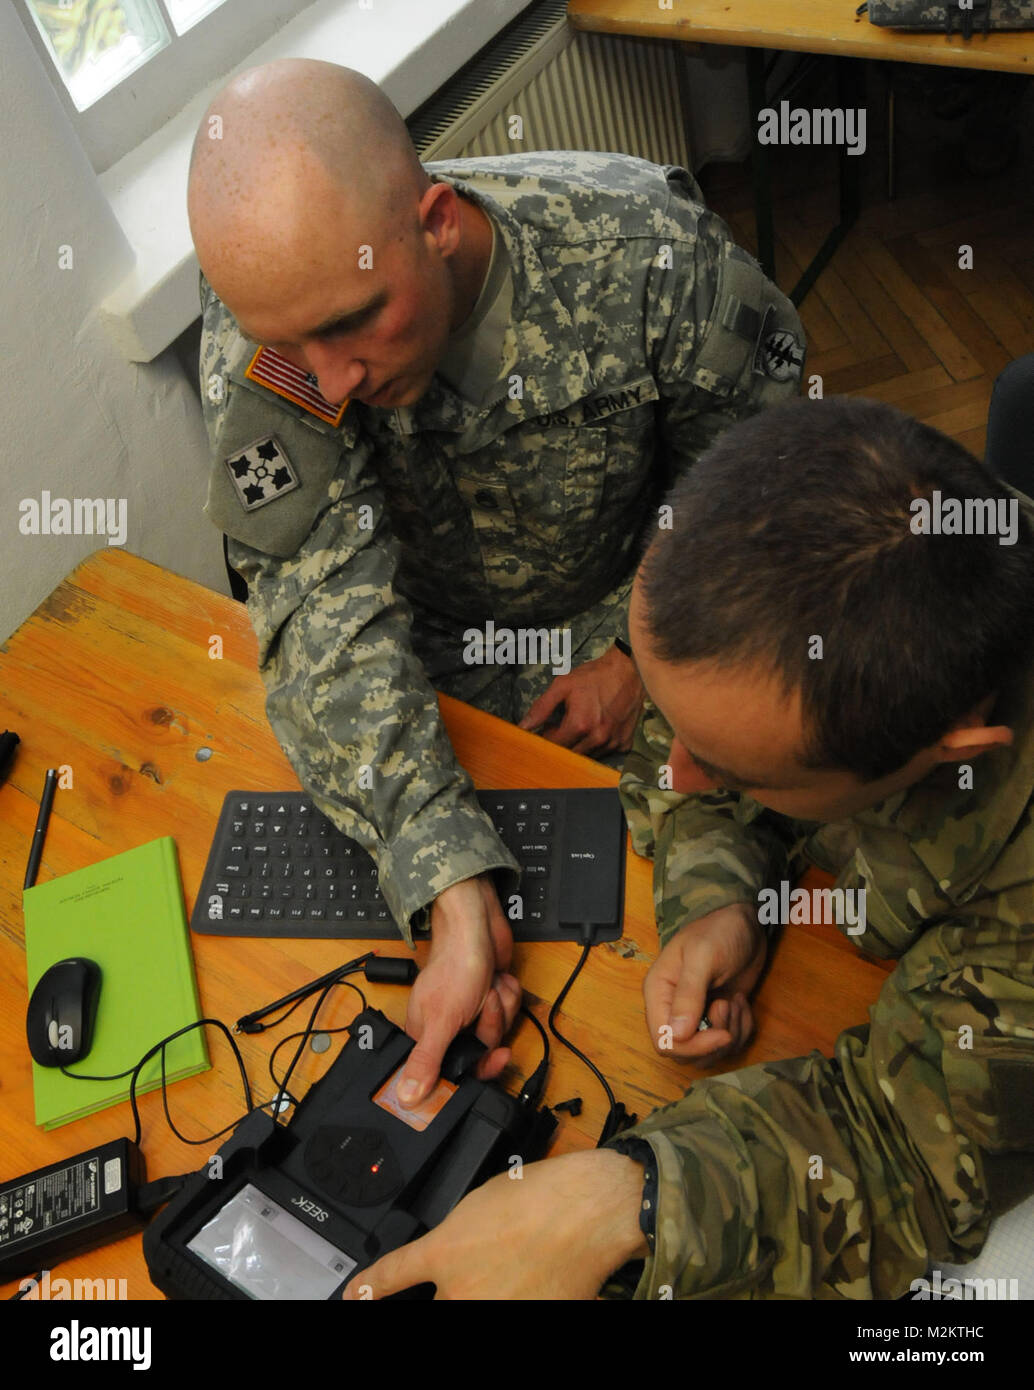 A U.S. military intelligence noncommissioned officer assigned to 1st Battalion, 10th Special Forces Group (Airborne), left, demonstrates how to use the Secure Electronic Enrollment Kit to an intel officer assigned to the Poland Special Operations Command during a training engagement sponsored by U.S. Special Operations Command Europe Aug. 11 at Panzer Barracks. The engagement is part of SOCEUR's mission to increase the SOF interoperability and capability of partner nations within European Command's area of responsibility. Military intelligence soldier assists Polish soldier with equipment by E Stock Photo